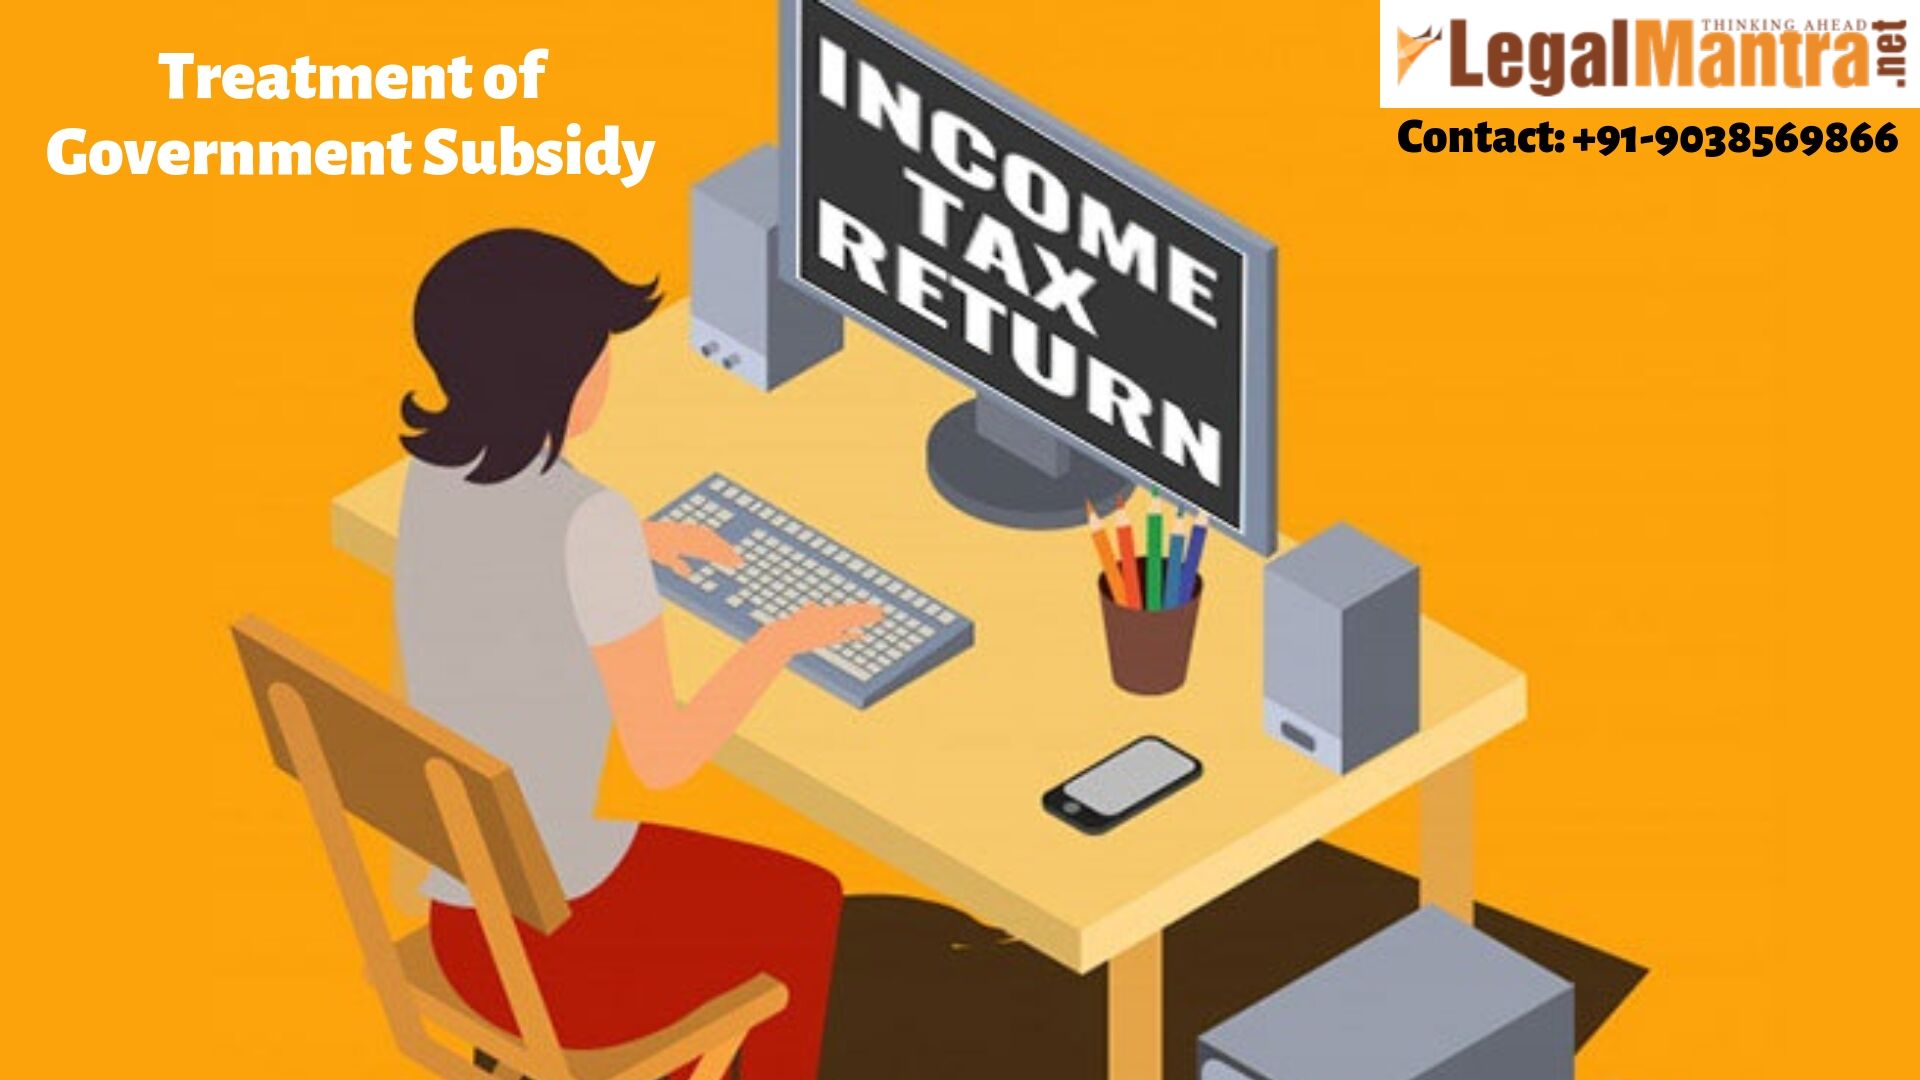 Income Tax Act & Treatment of Government Subsidy